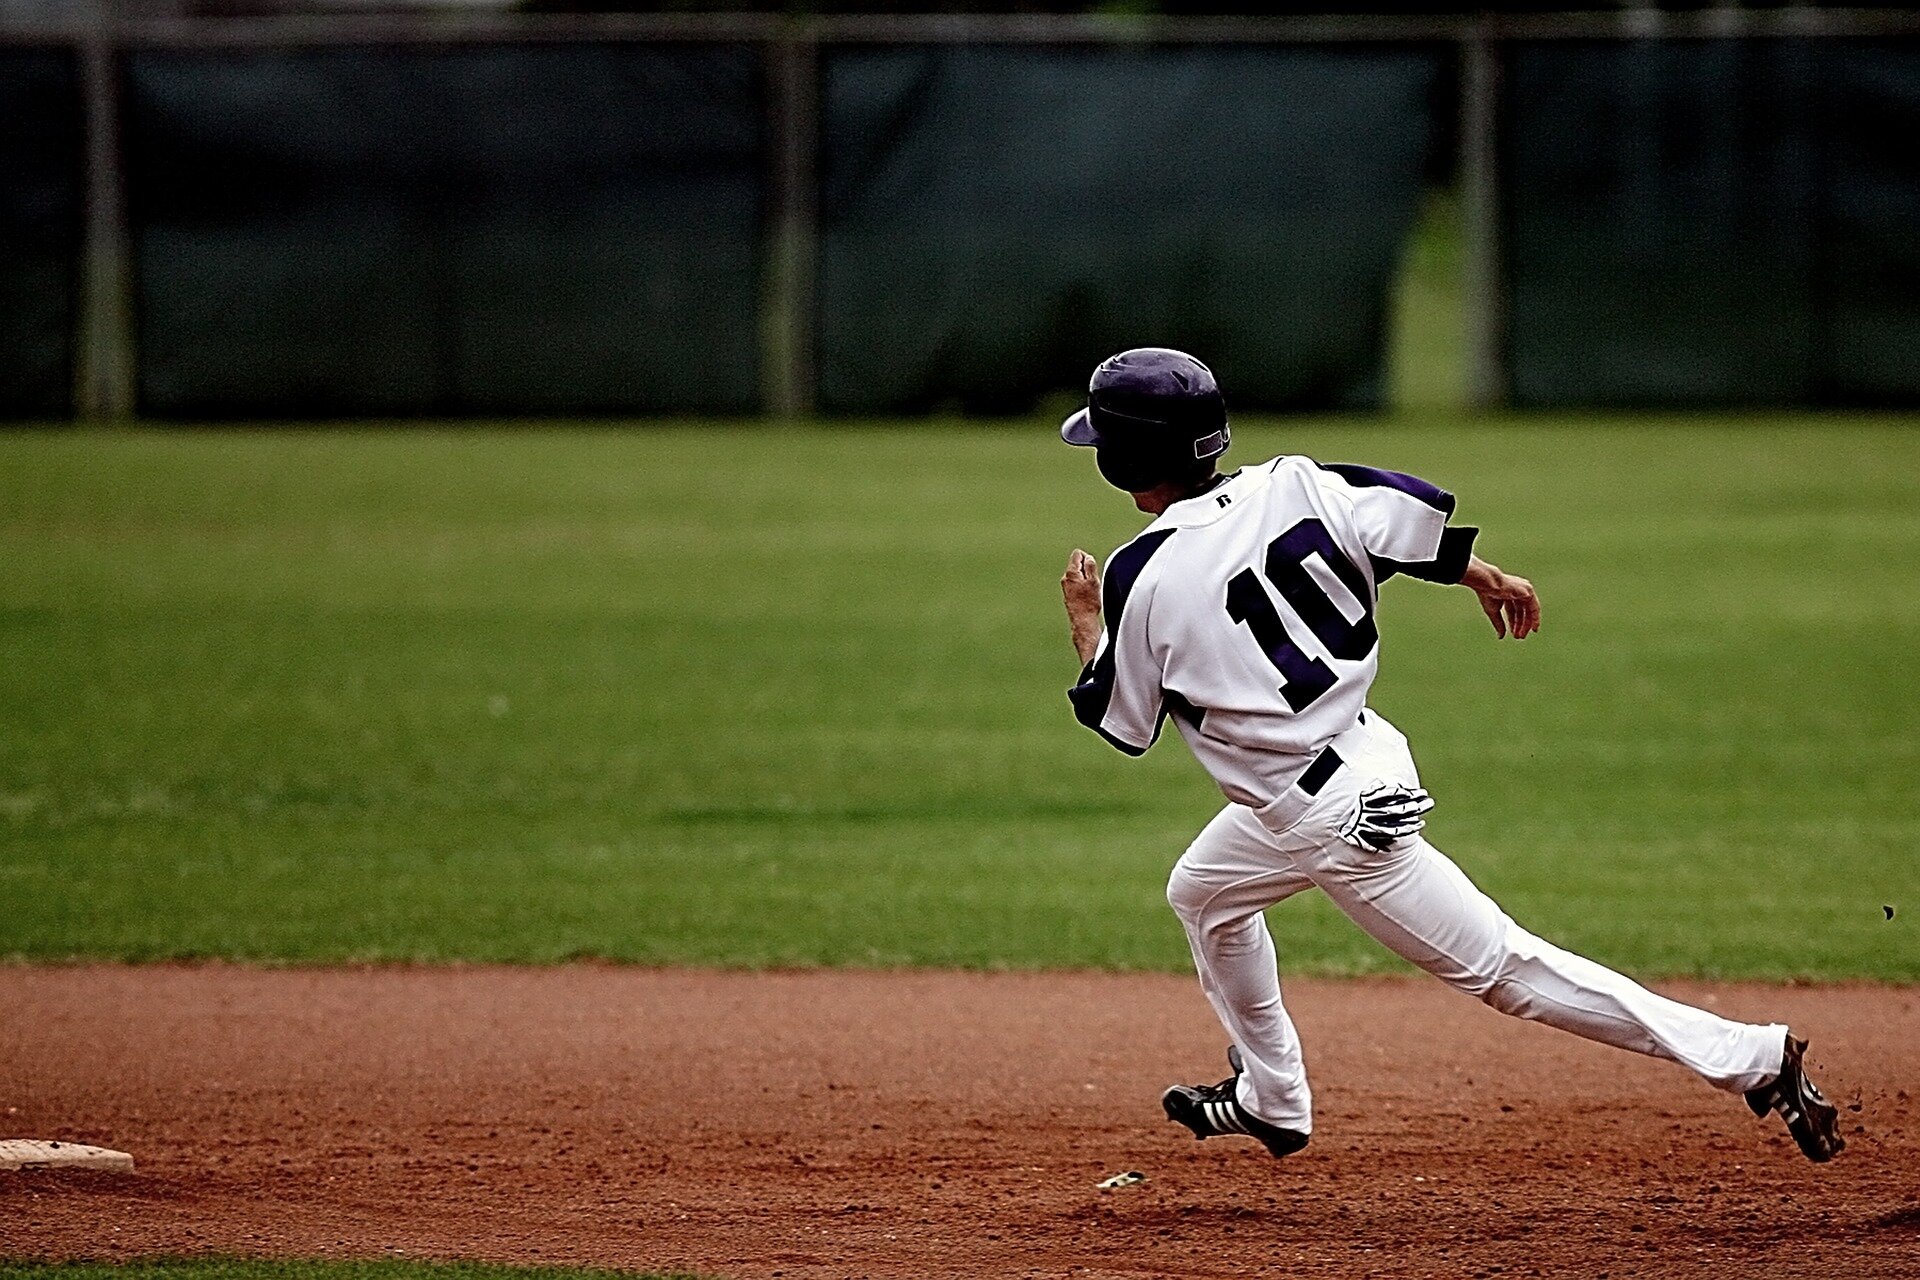 The curved run of a baseball athlete